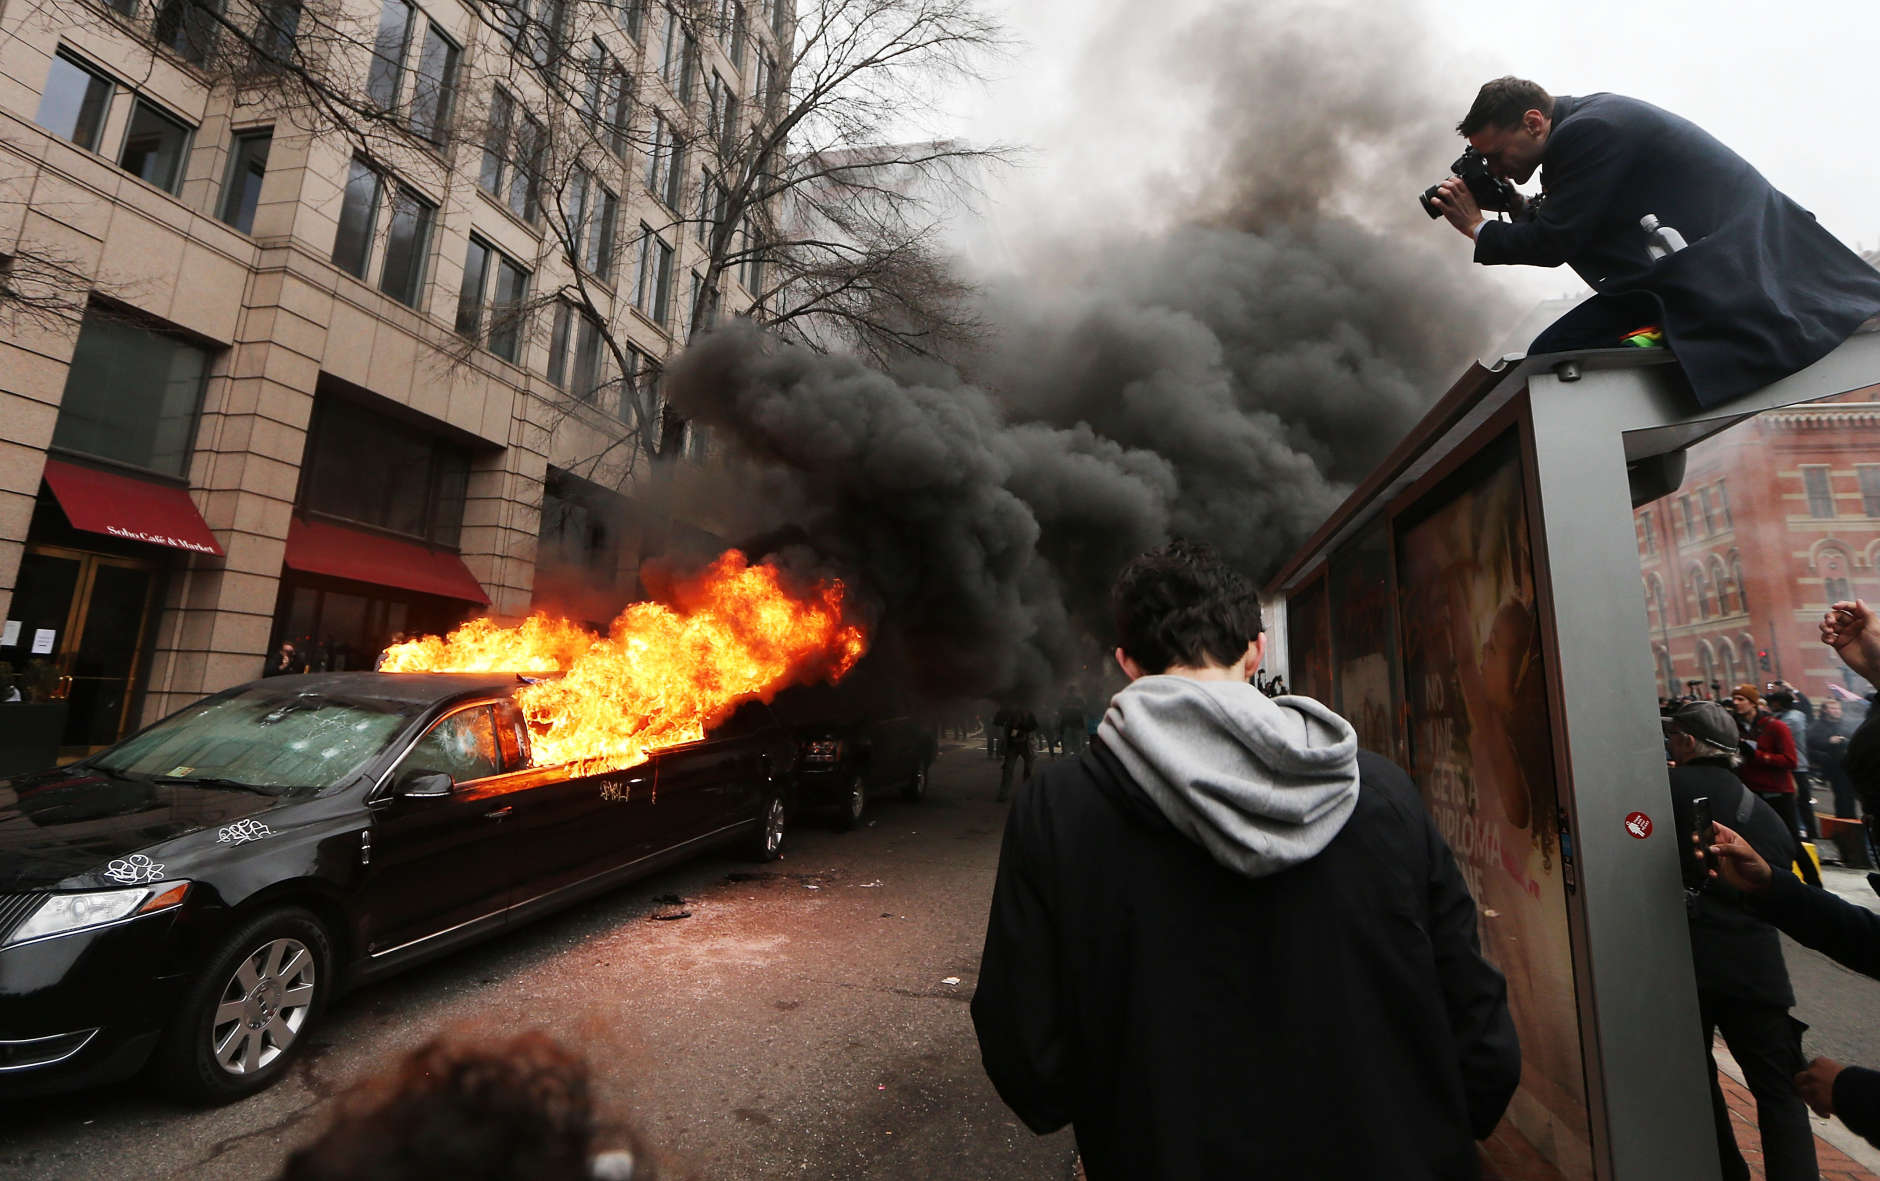 WASHINGTON, DC - JANUARY 20:  A limousine burns after being smashed by anti-Trump protesters on K Street on January 20, 2017 in Washington, DC. While protests were mostly peaceful, some turned violent. President-elect Donald Trump was sworn-in as the 45th U.S. President today.  (Photo by Mario Tama/Getty Images)